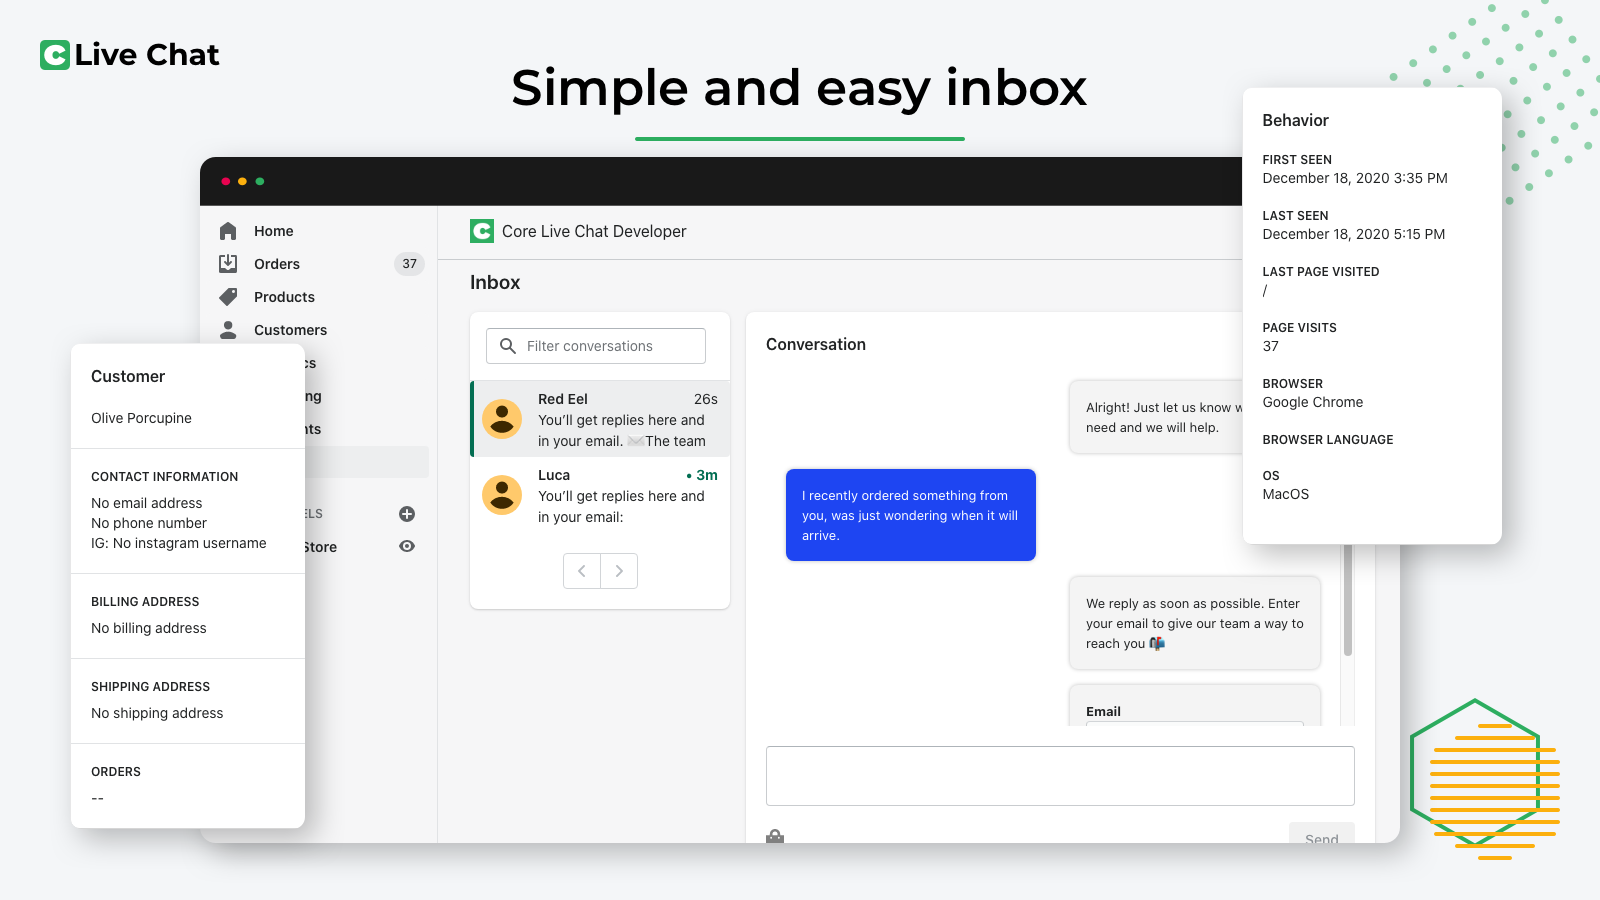 Simple and easy inbox